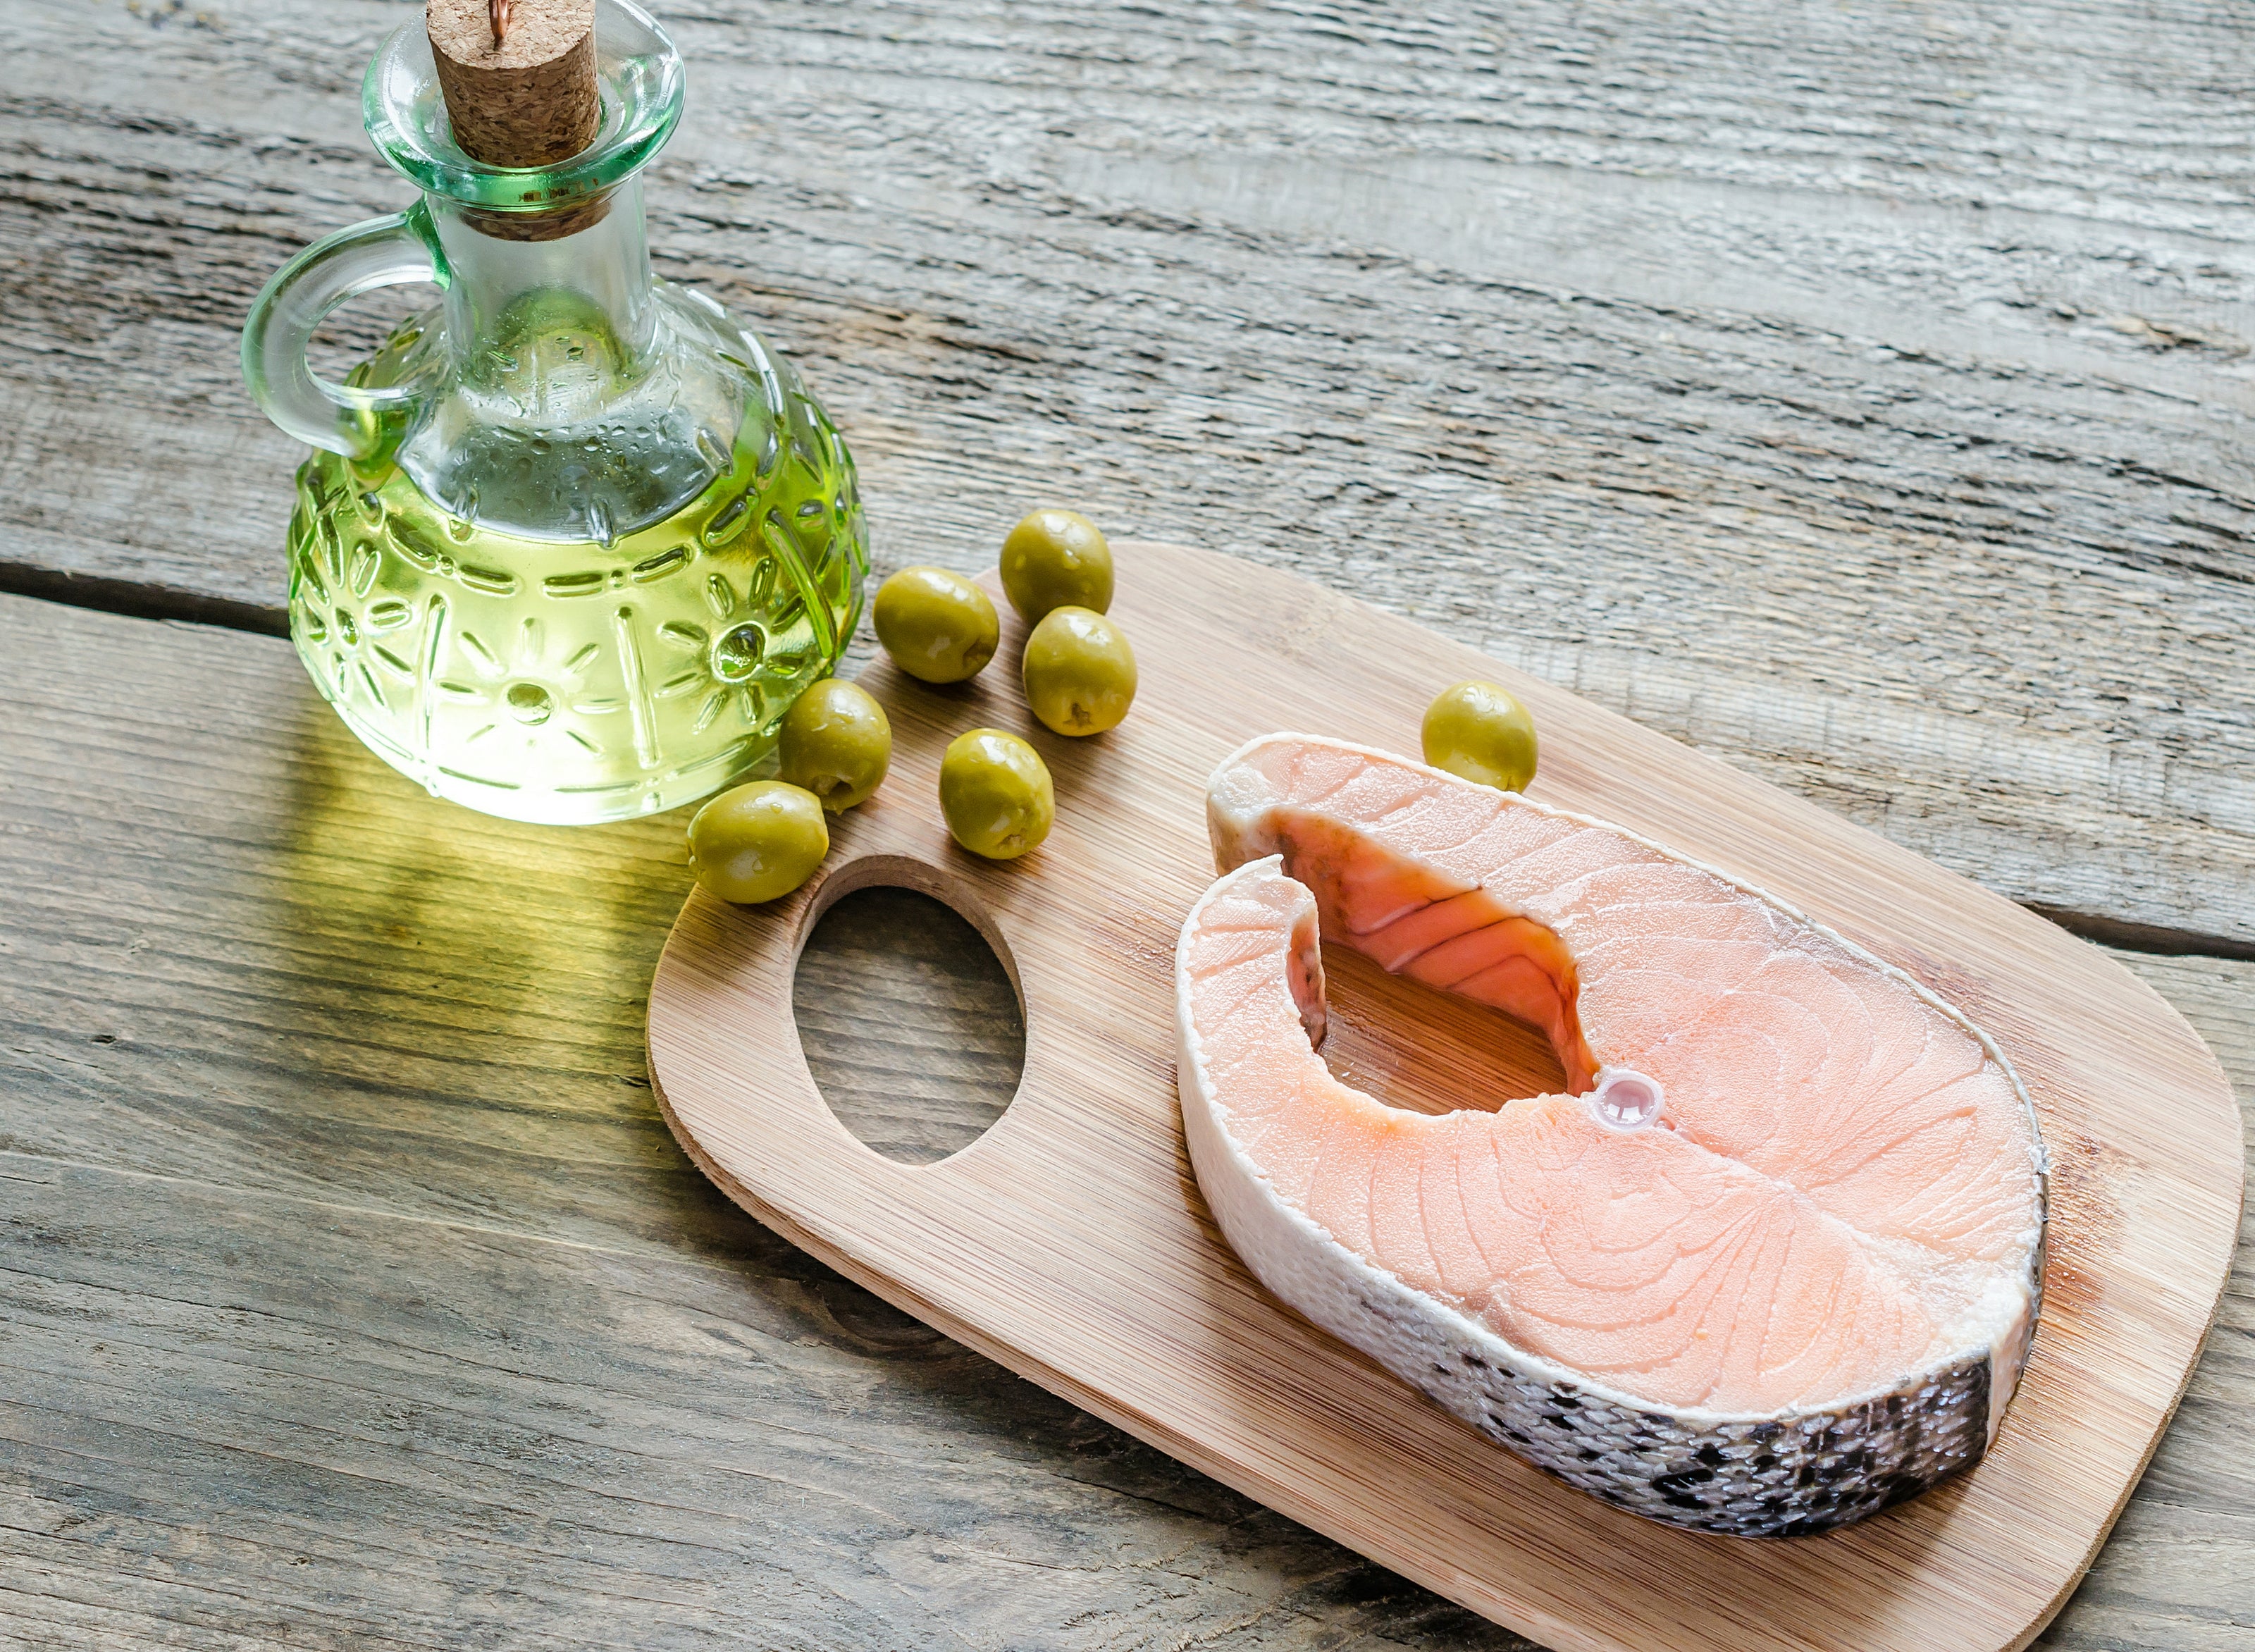 food-with-unsaturated-fats-salmon-and-olive-oil-2023-11-27-05-20-36-utc.jpg__PID:e67d9546-d743-4a95-a62a-ce36bd8393e9